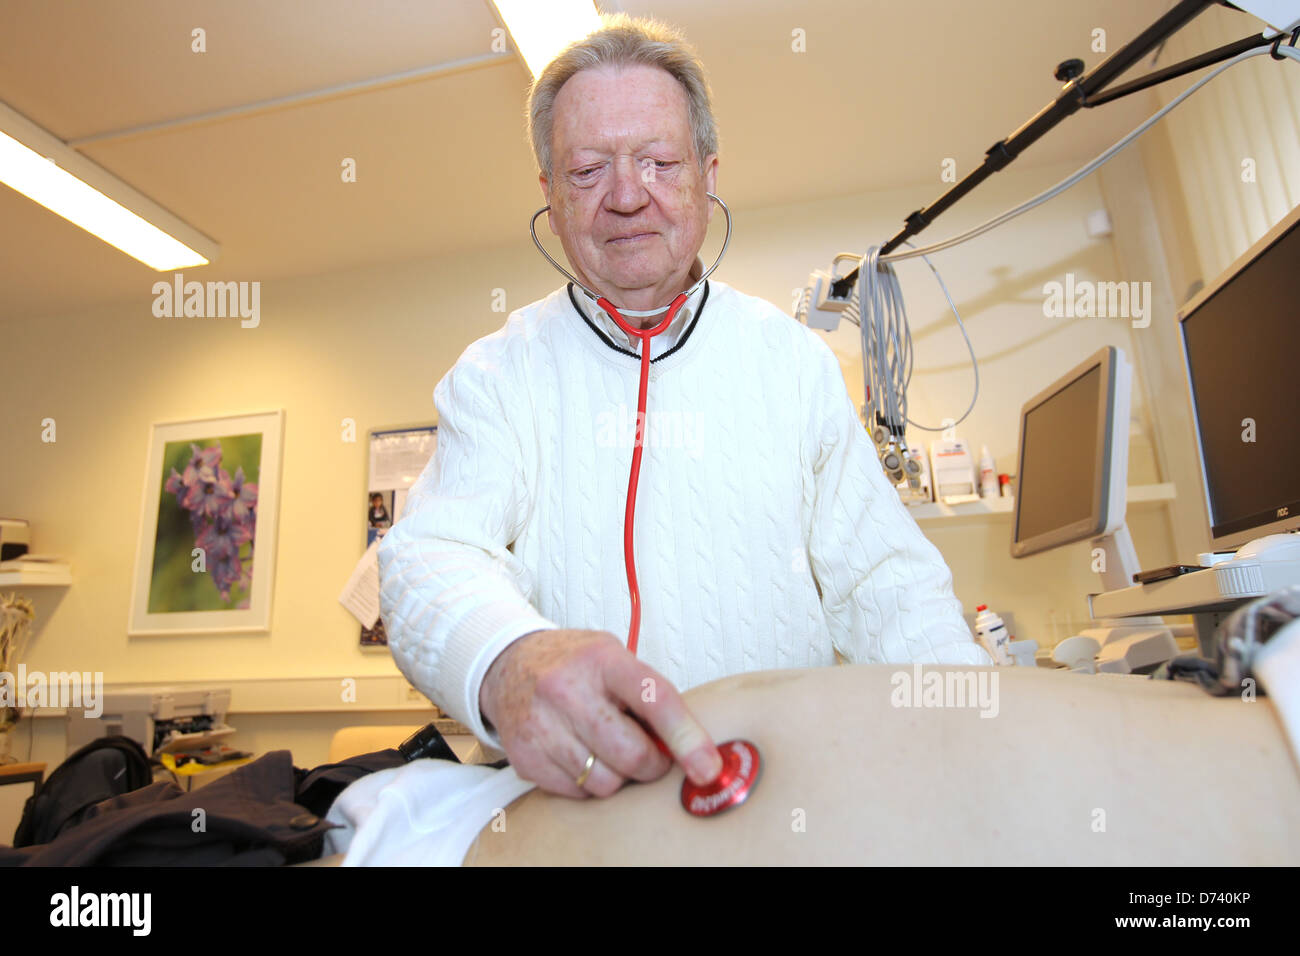 Bad Segeberg, Germany, Uwe thinker examines a patient in his practice without limits Stock Photo